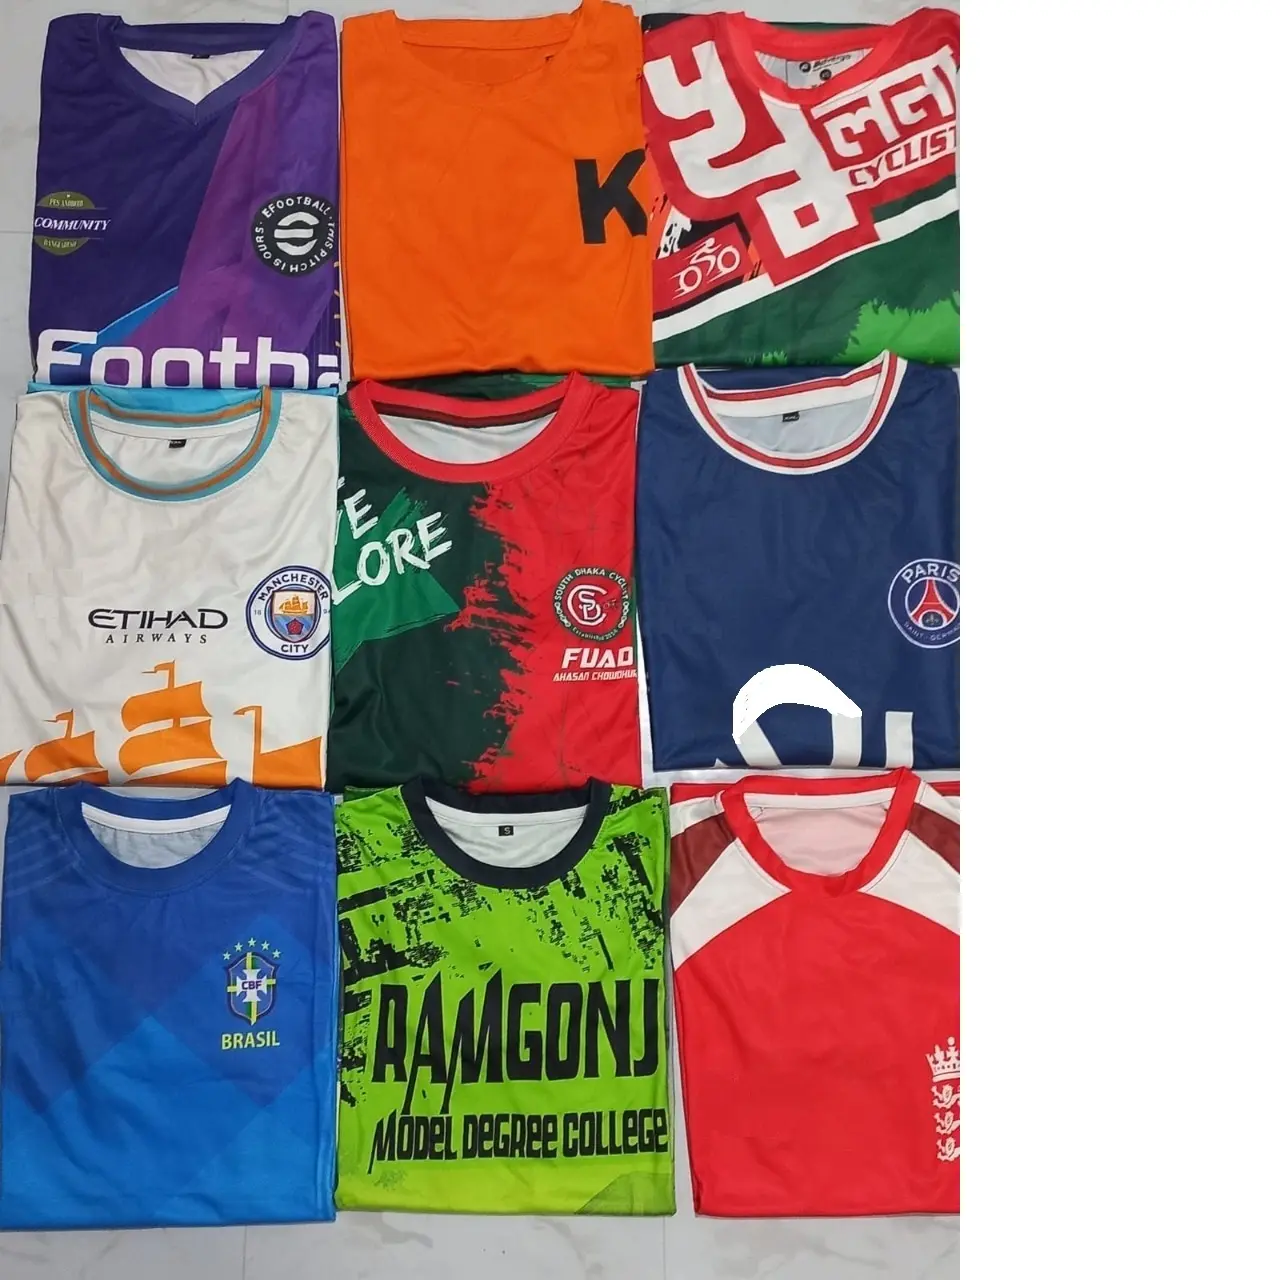 Surplus Brand design printing surplus stock lot garments combed cotton t shirt with cheap price.